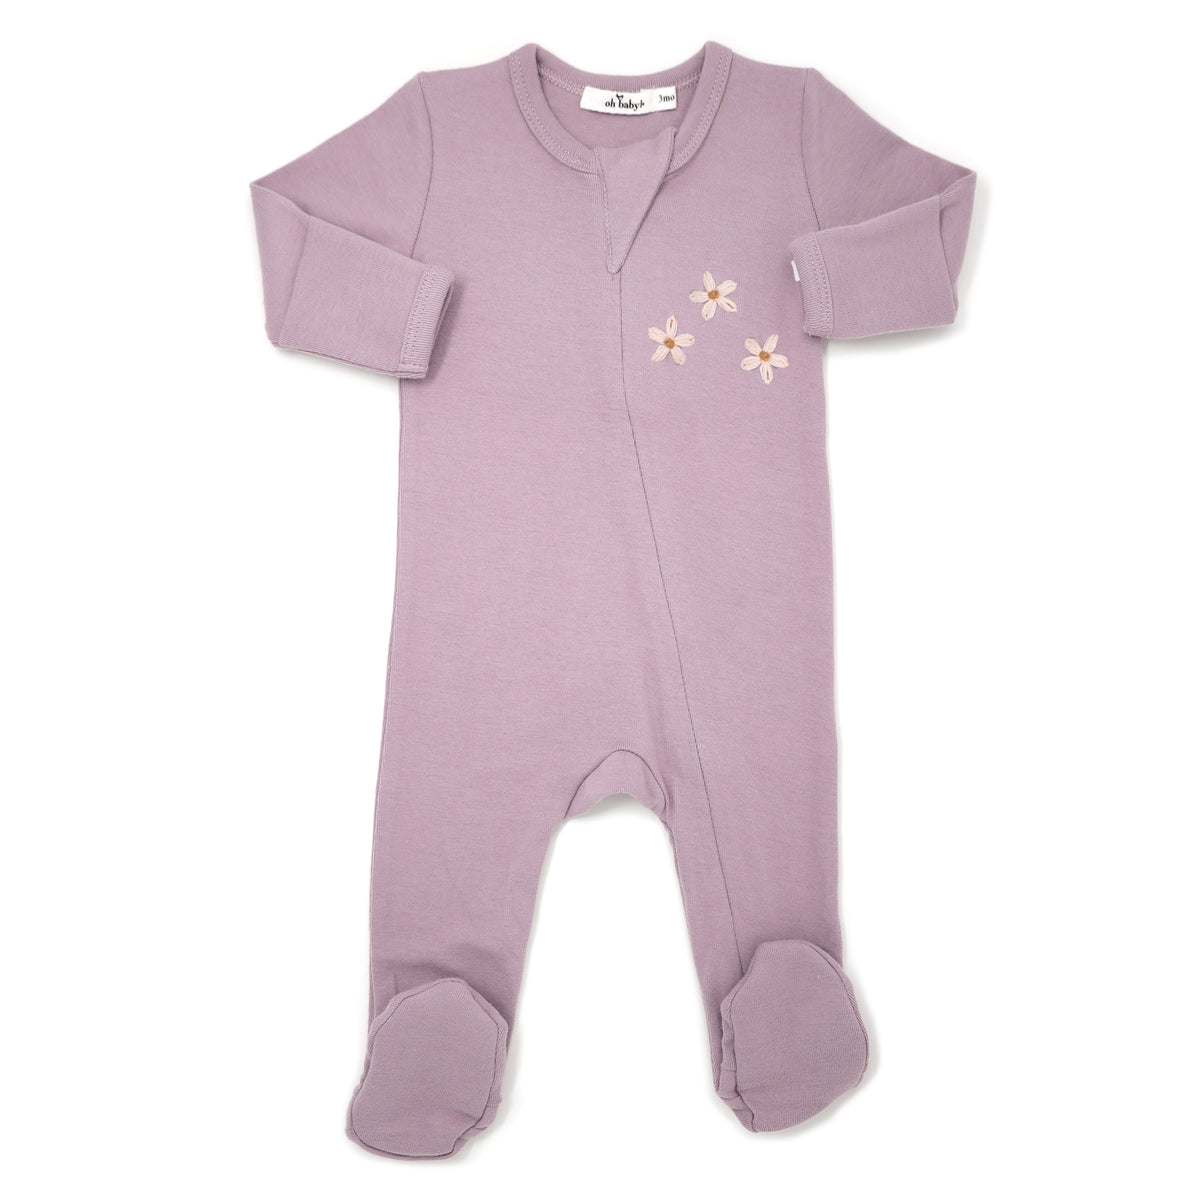 oh baby! Hand Embroidered Daisies Zipper Ruffle Footie - Dusty Lavender